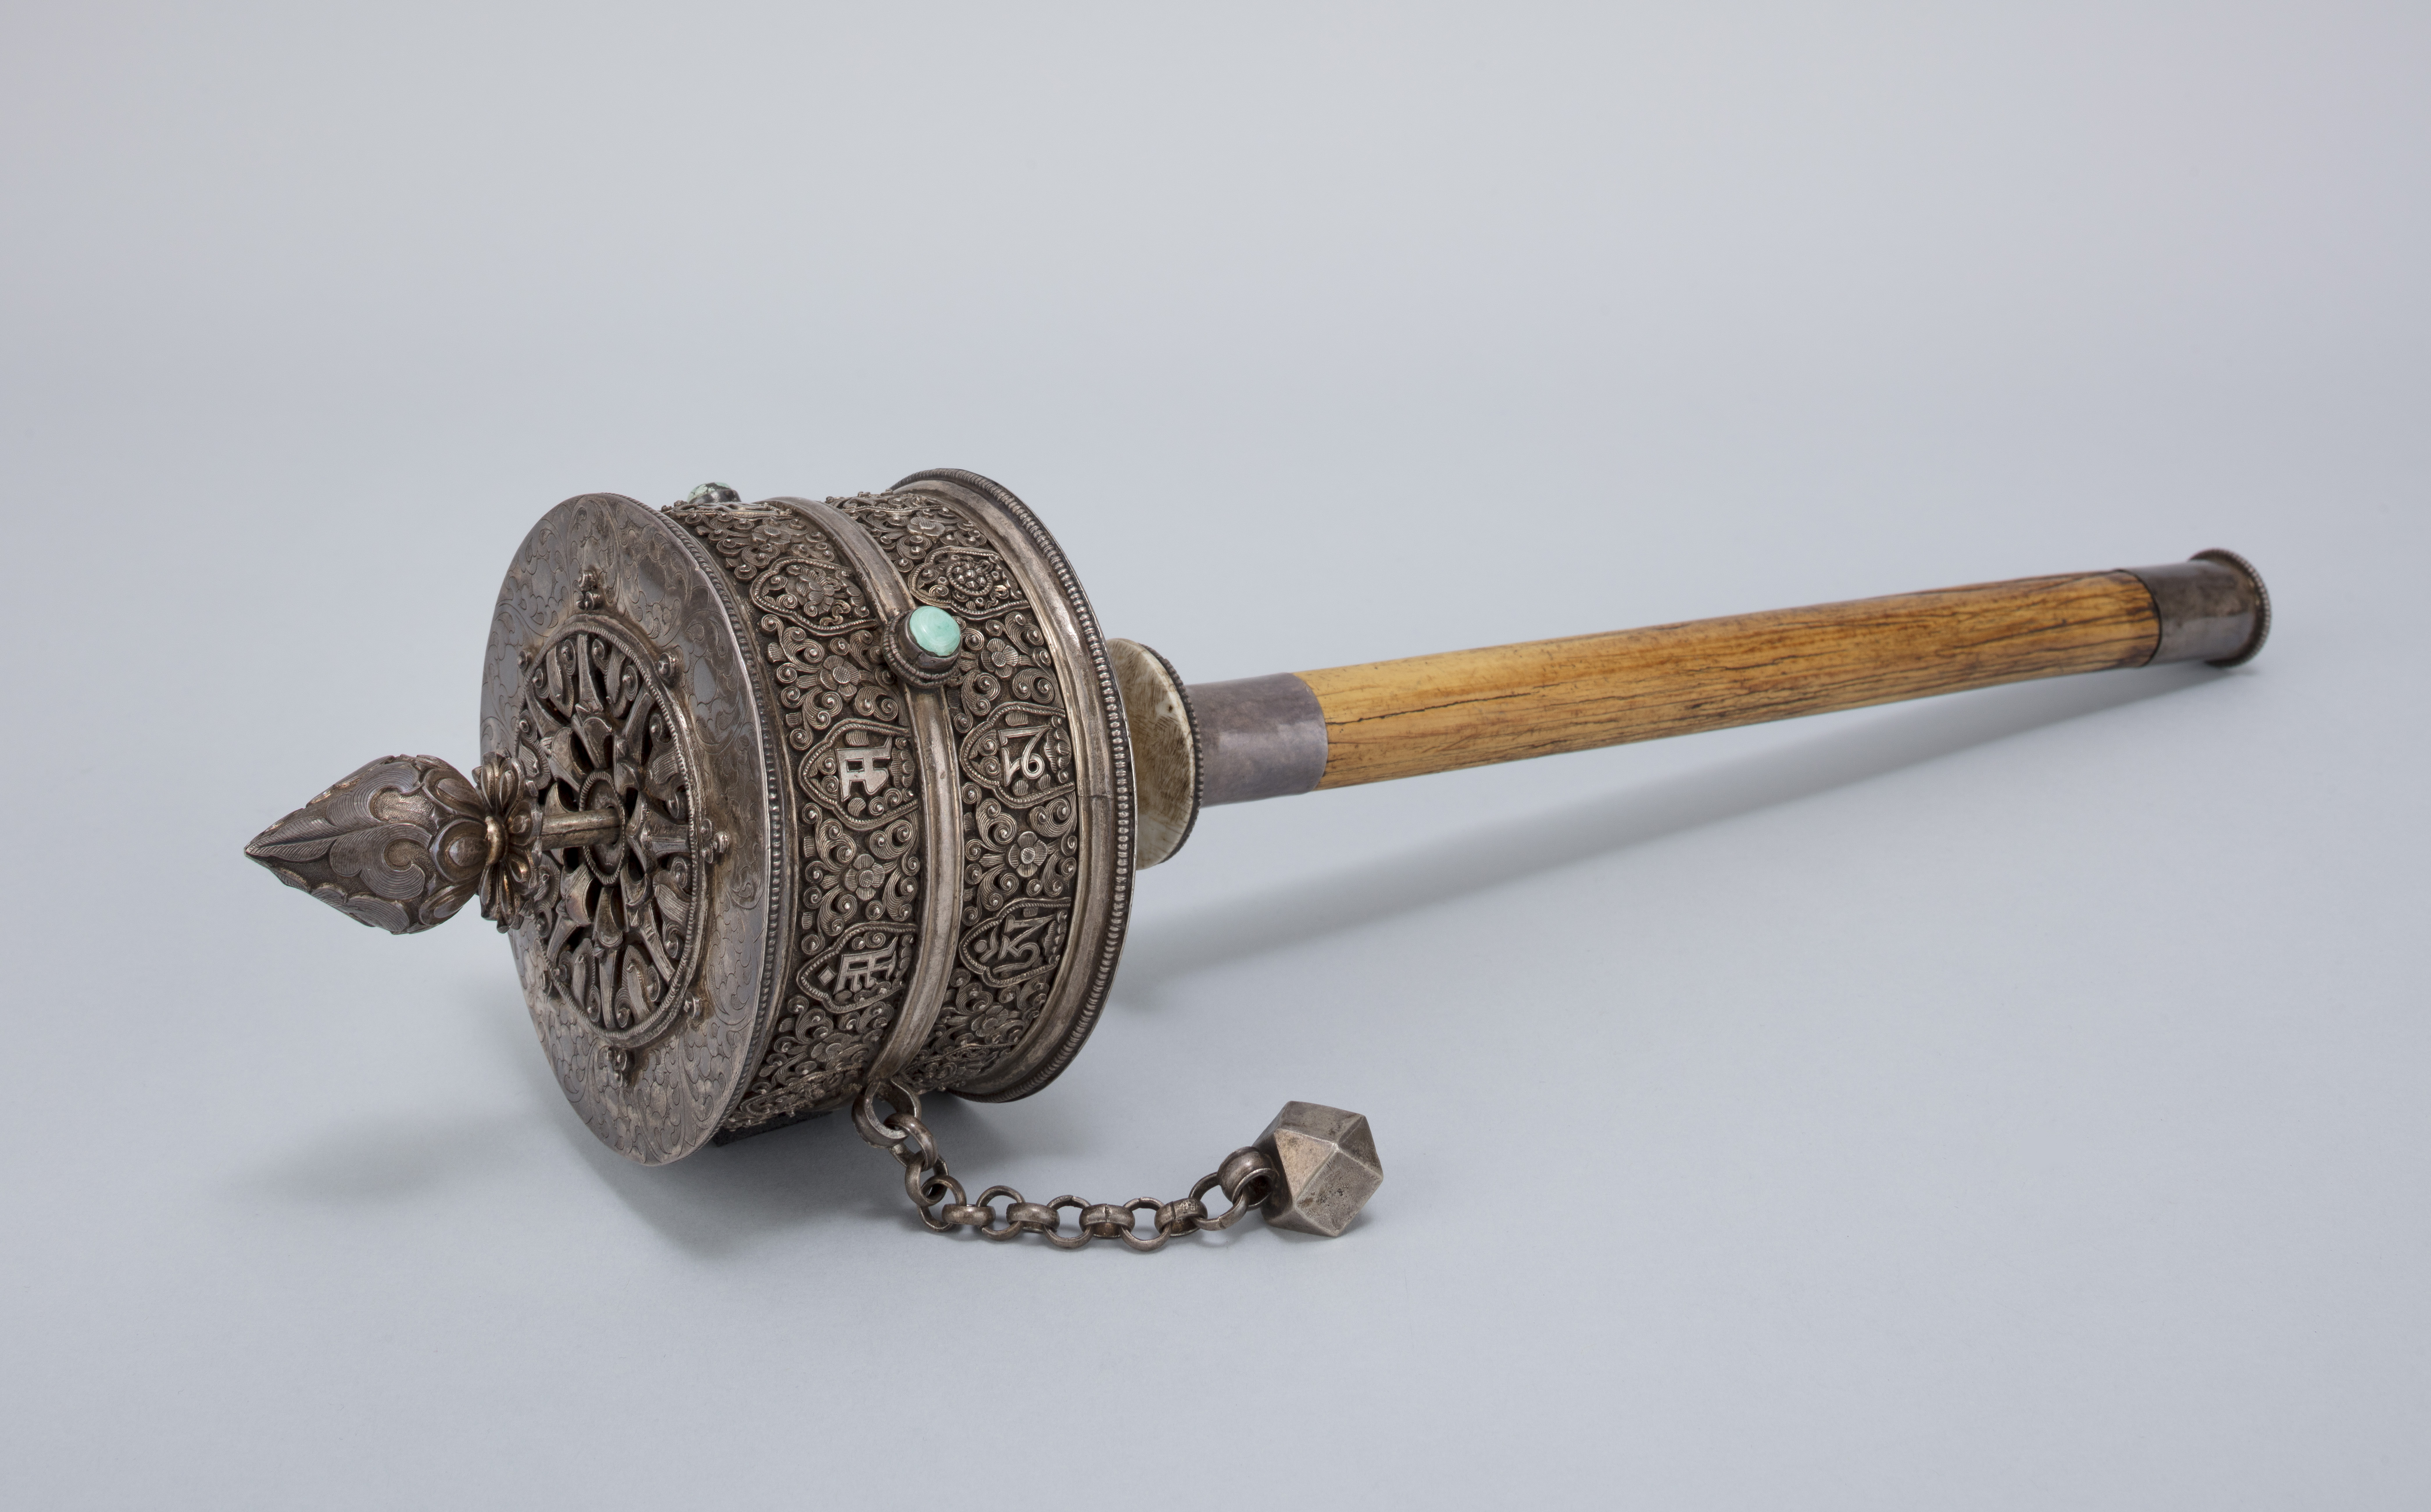 Silver religious implement with turquoise accents; ball and chain attached to rotating cylinder mounted on wooden handle